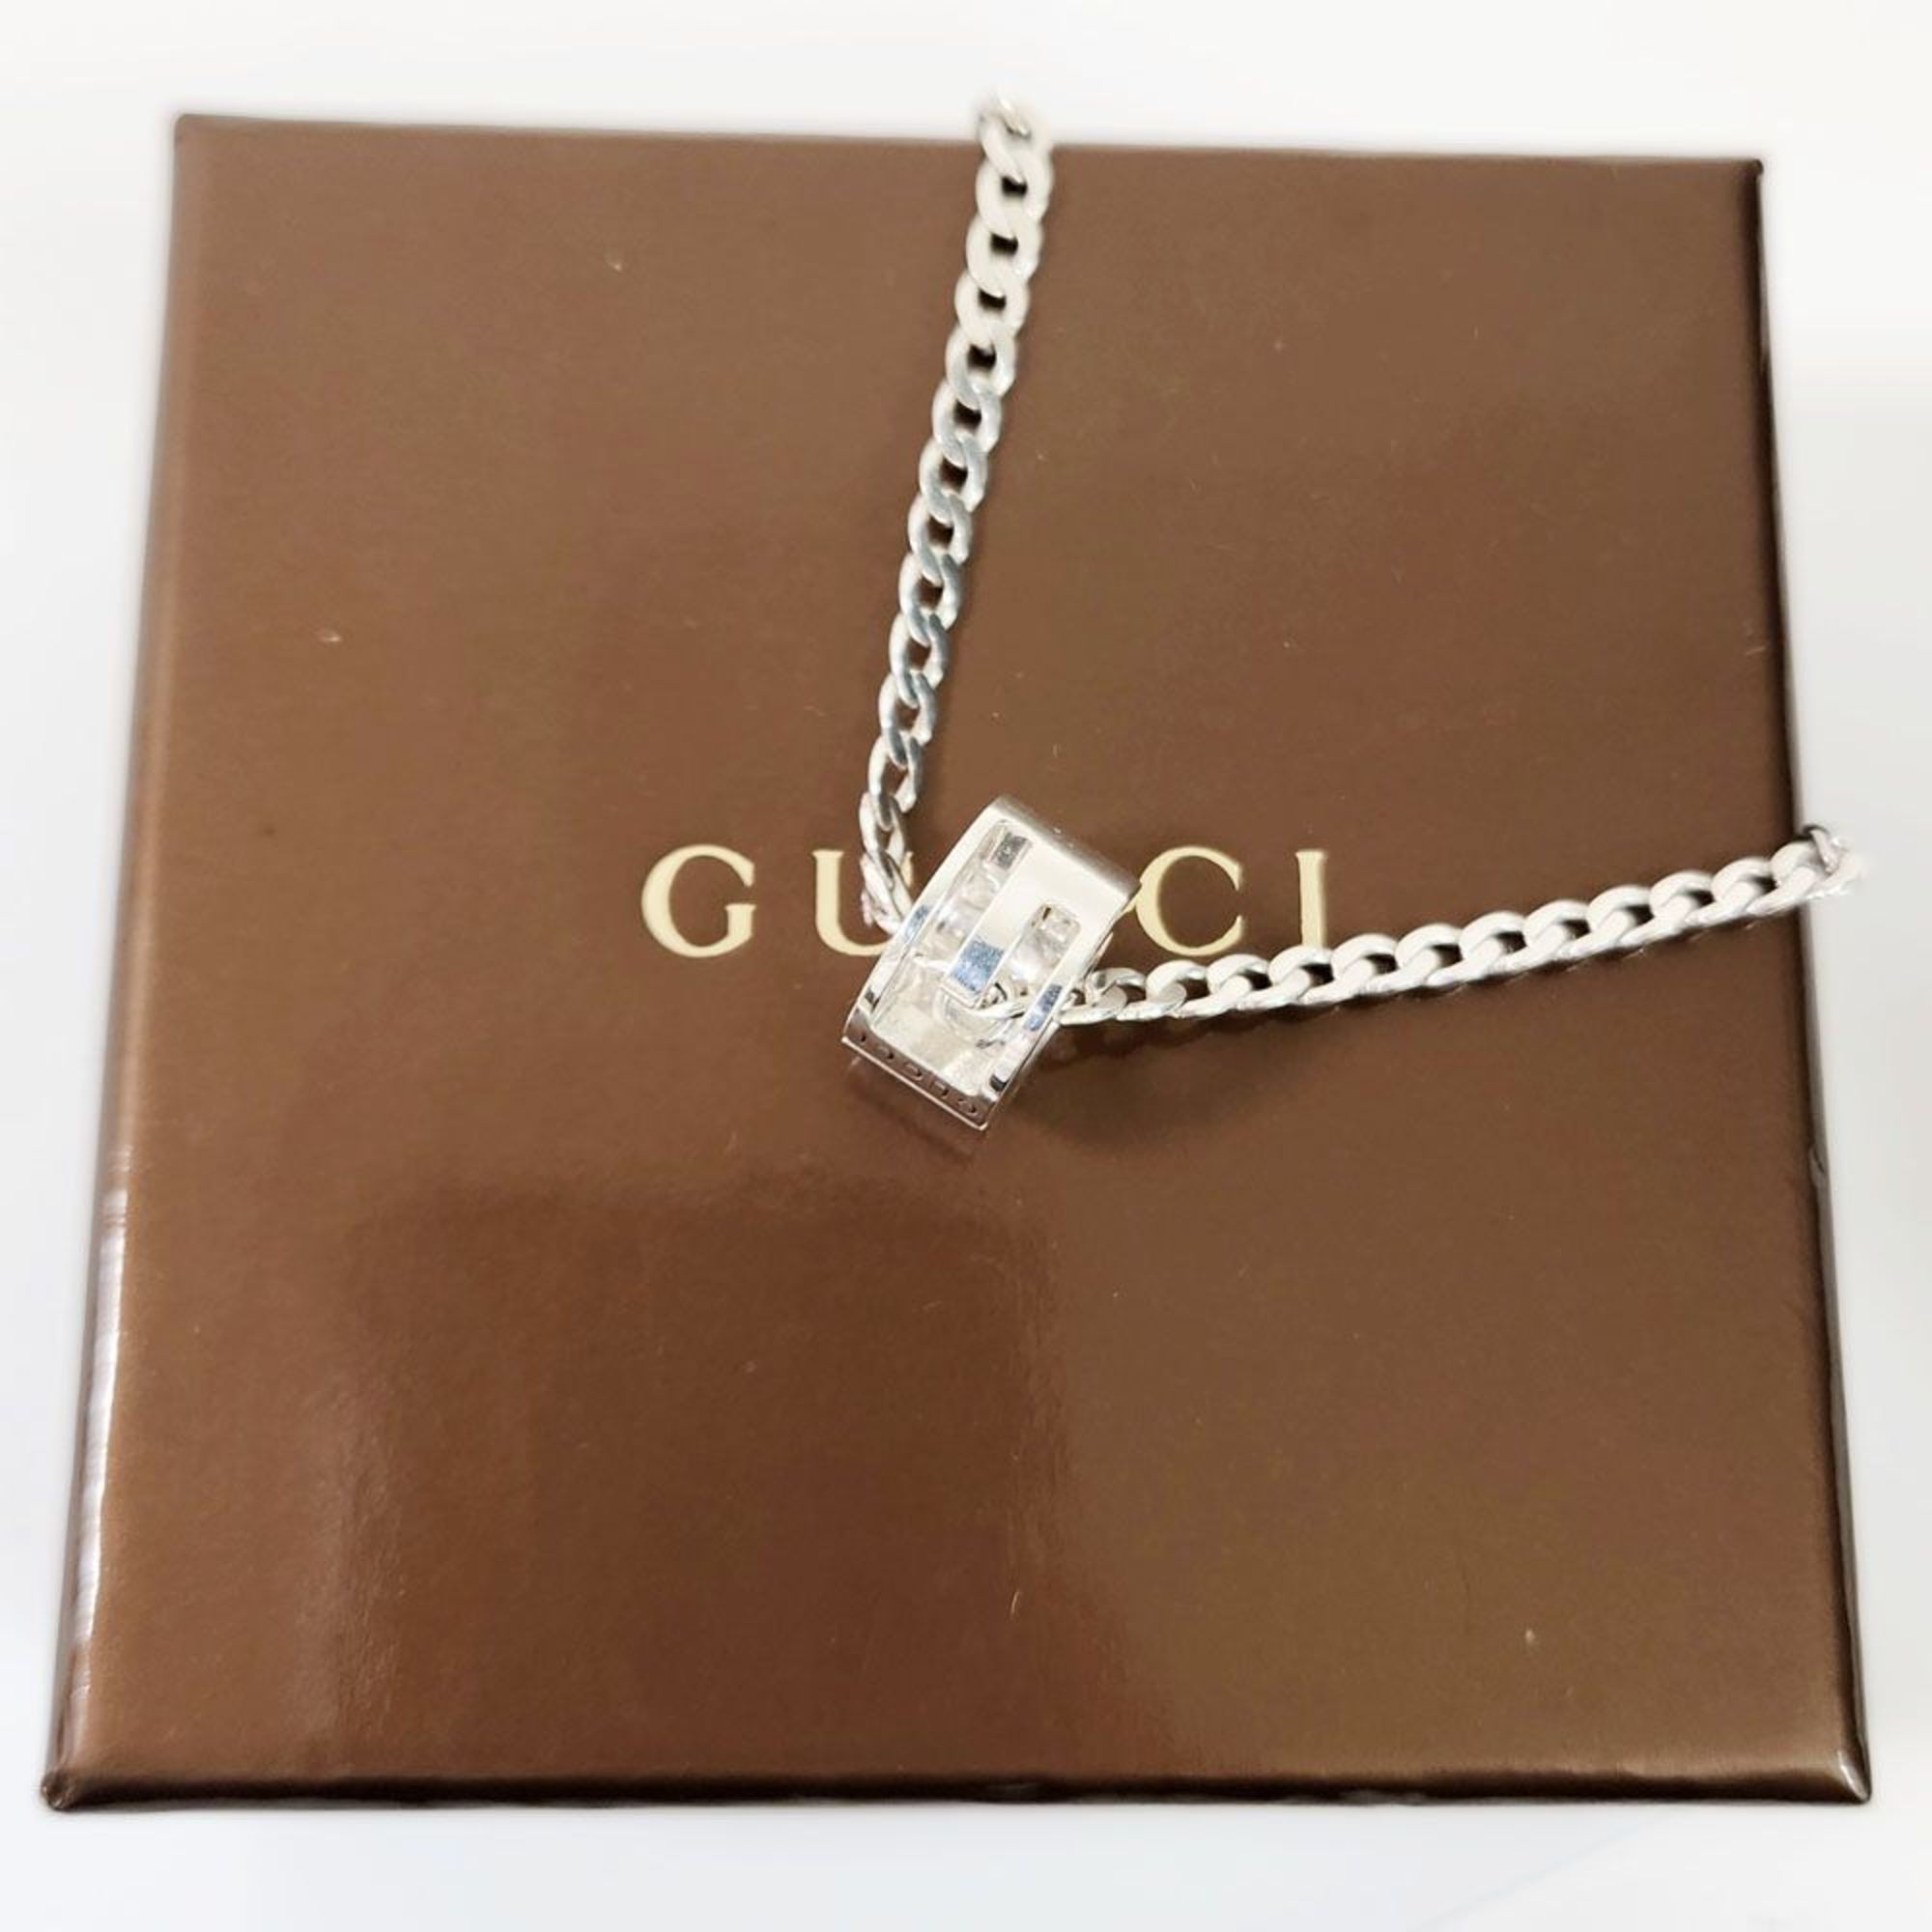 GUCCI Cutout G Ring Necklace Silver 223351 Pendant SV925 Men's Women's 925 Sterling